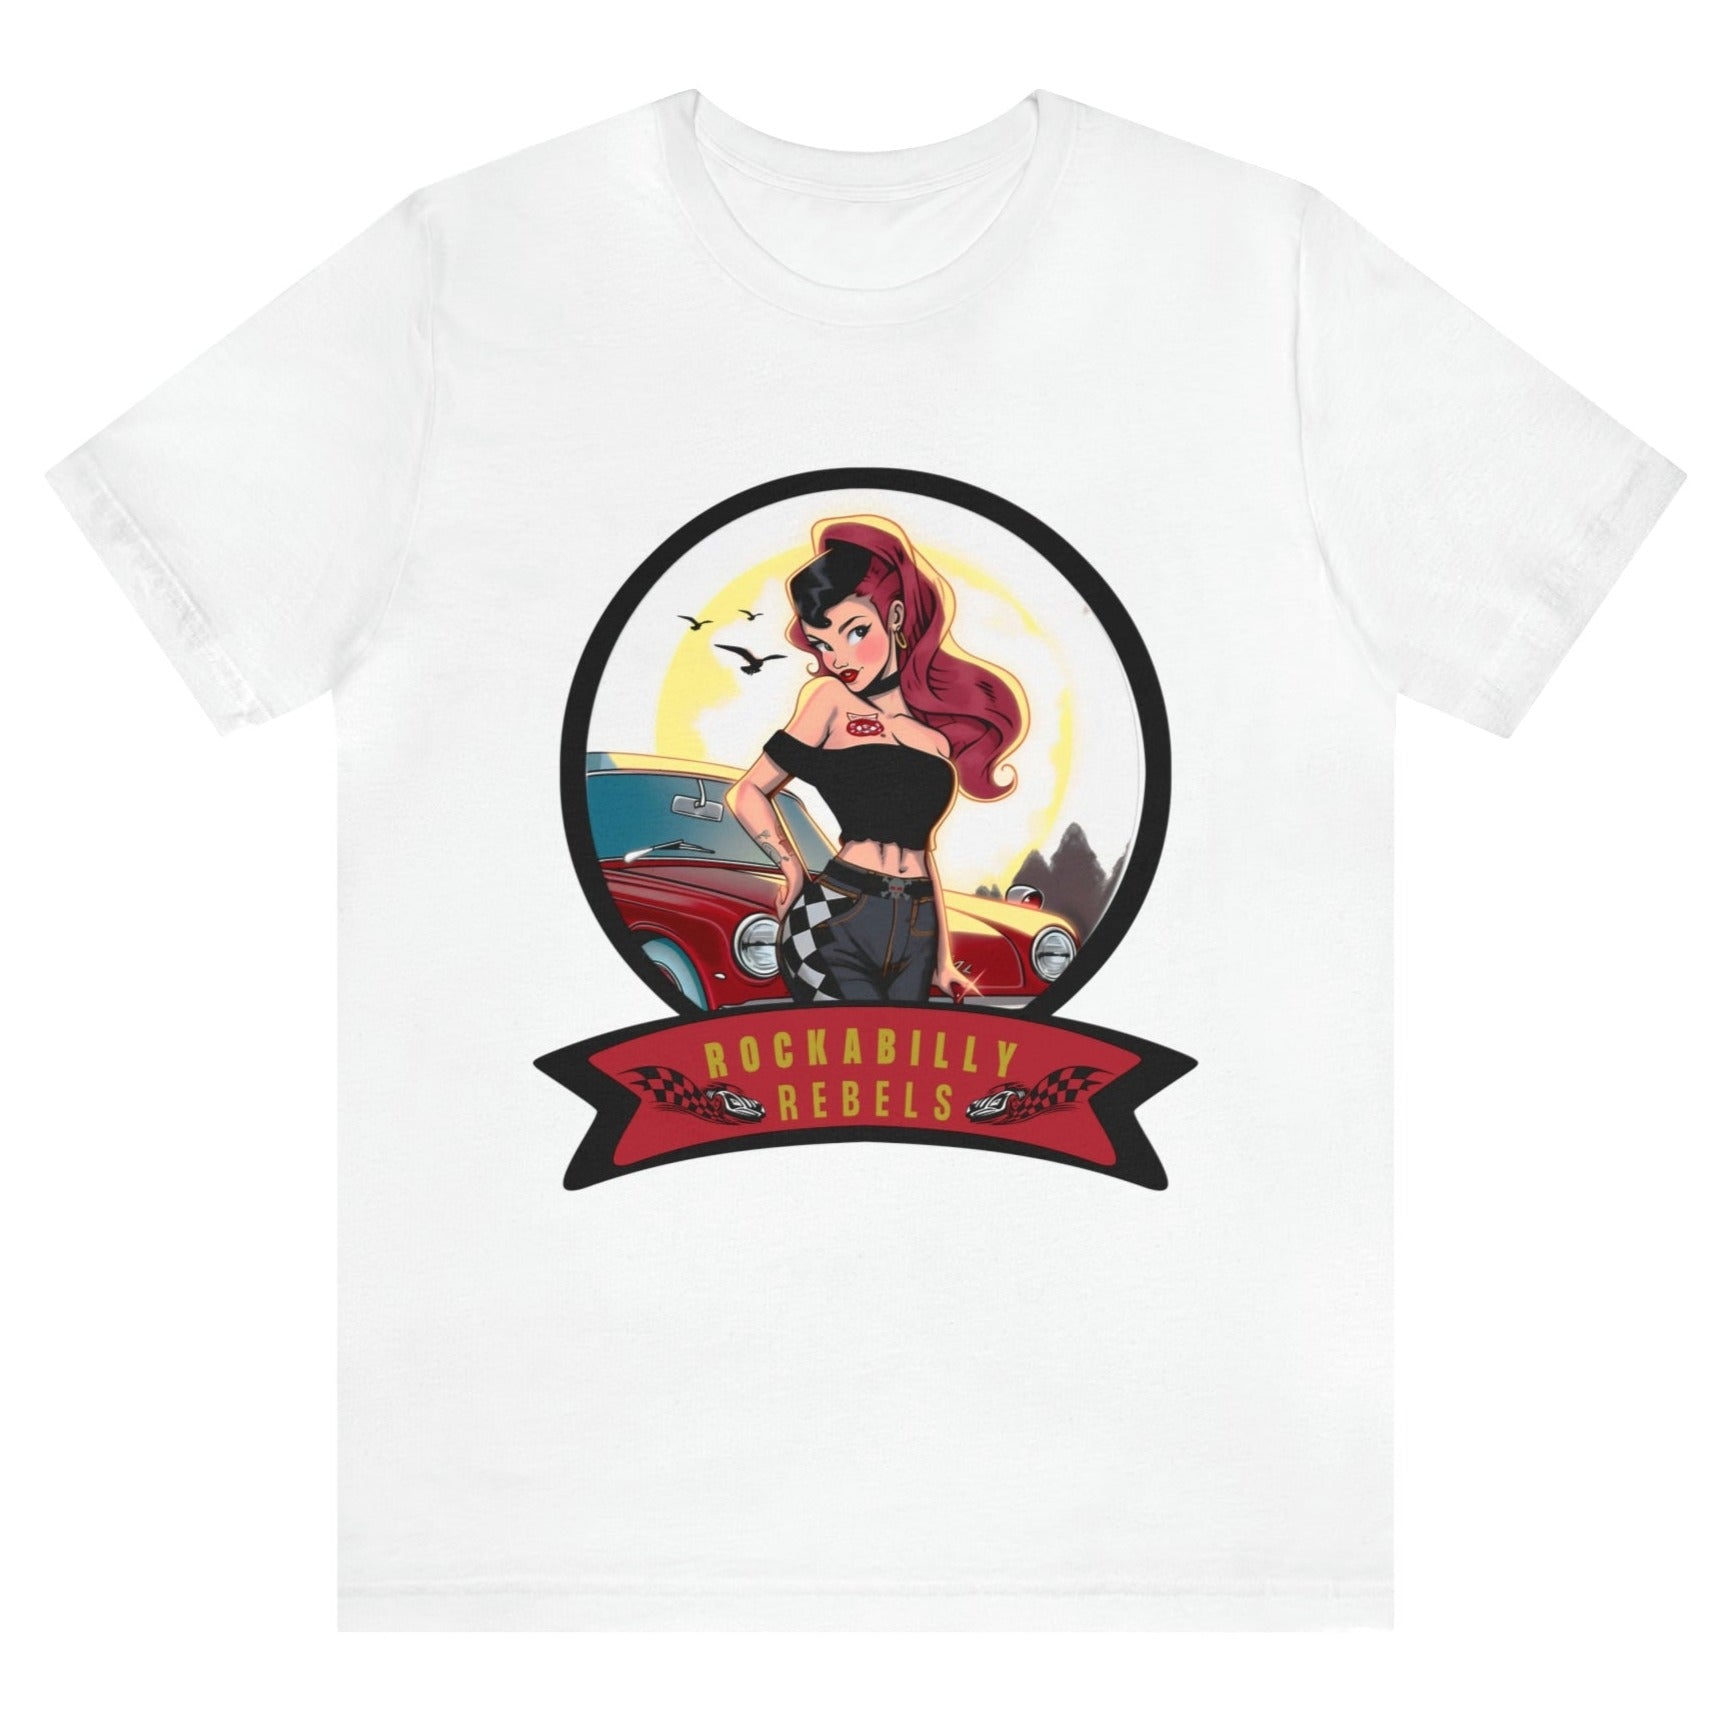 rockabilly-rebels-graphic-white-t-shirt